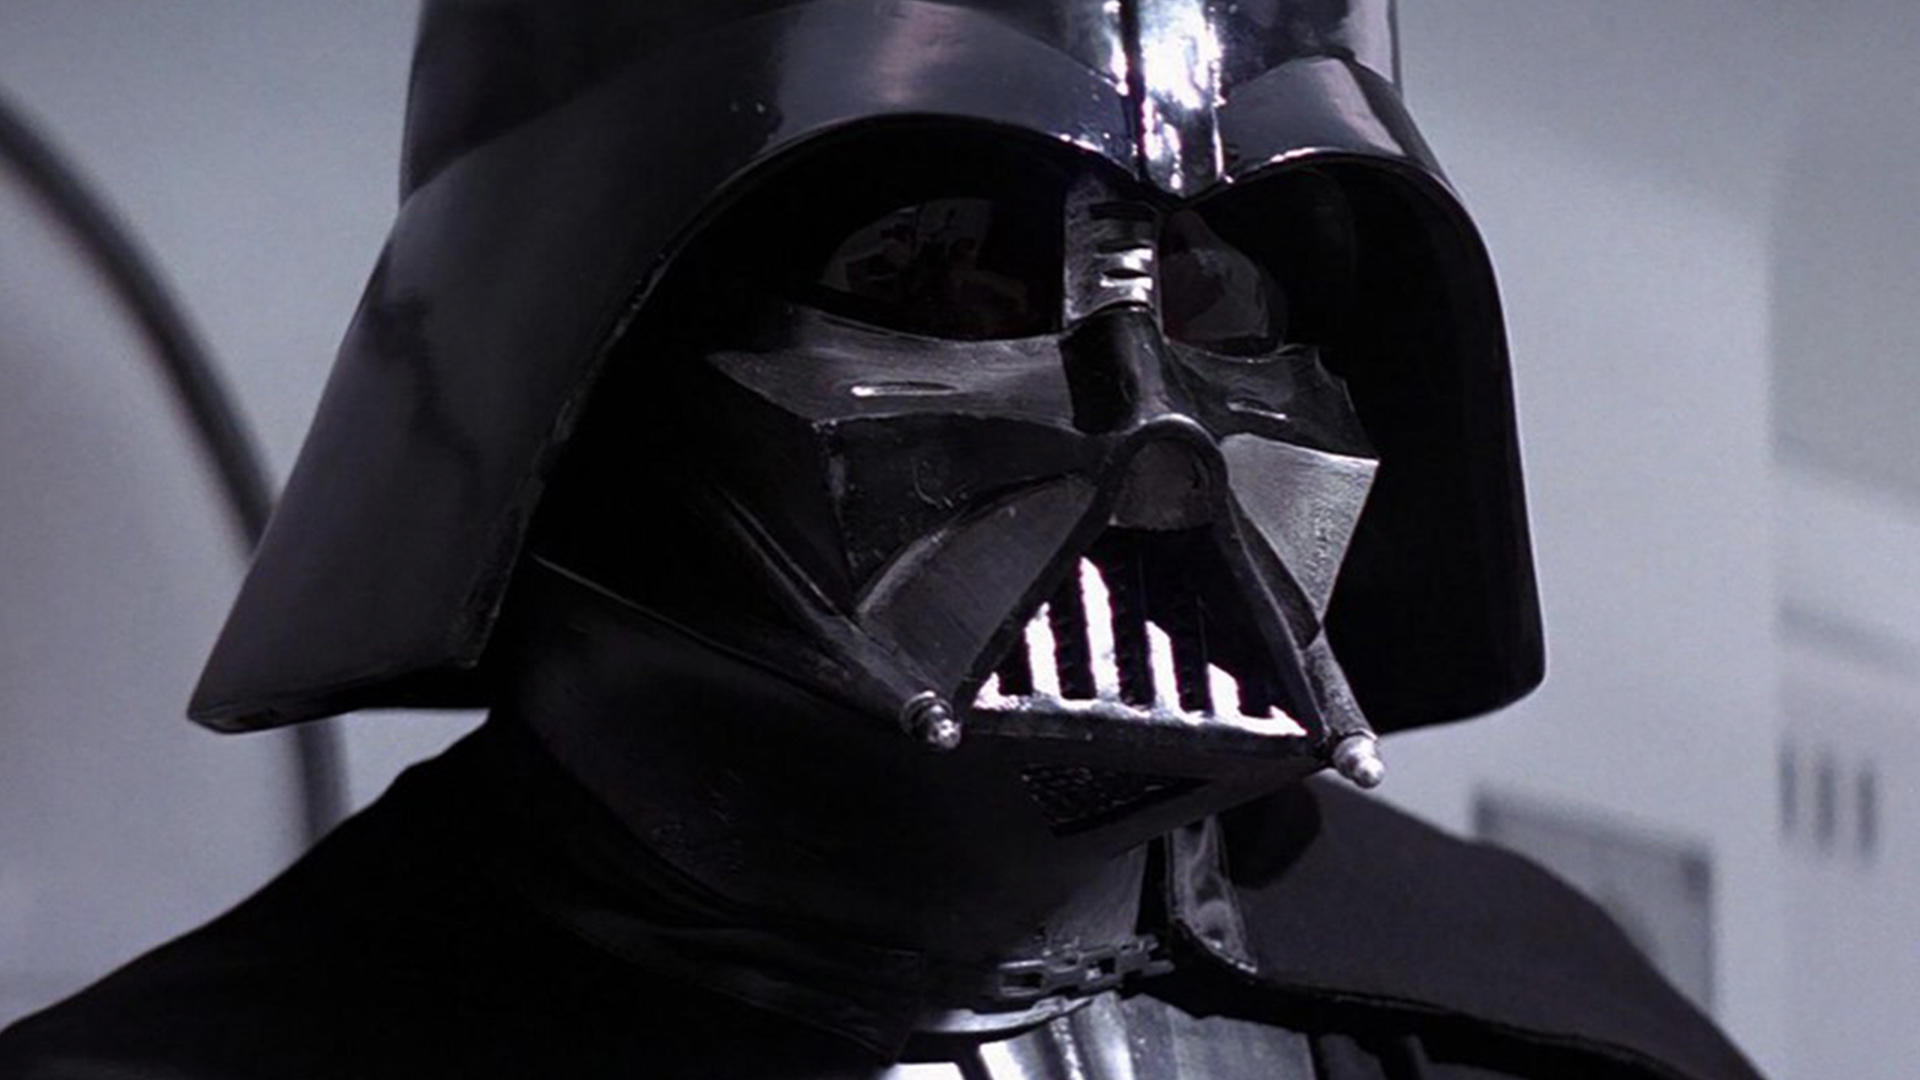 Darth Vader from Star Wars in his black armour